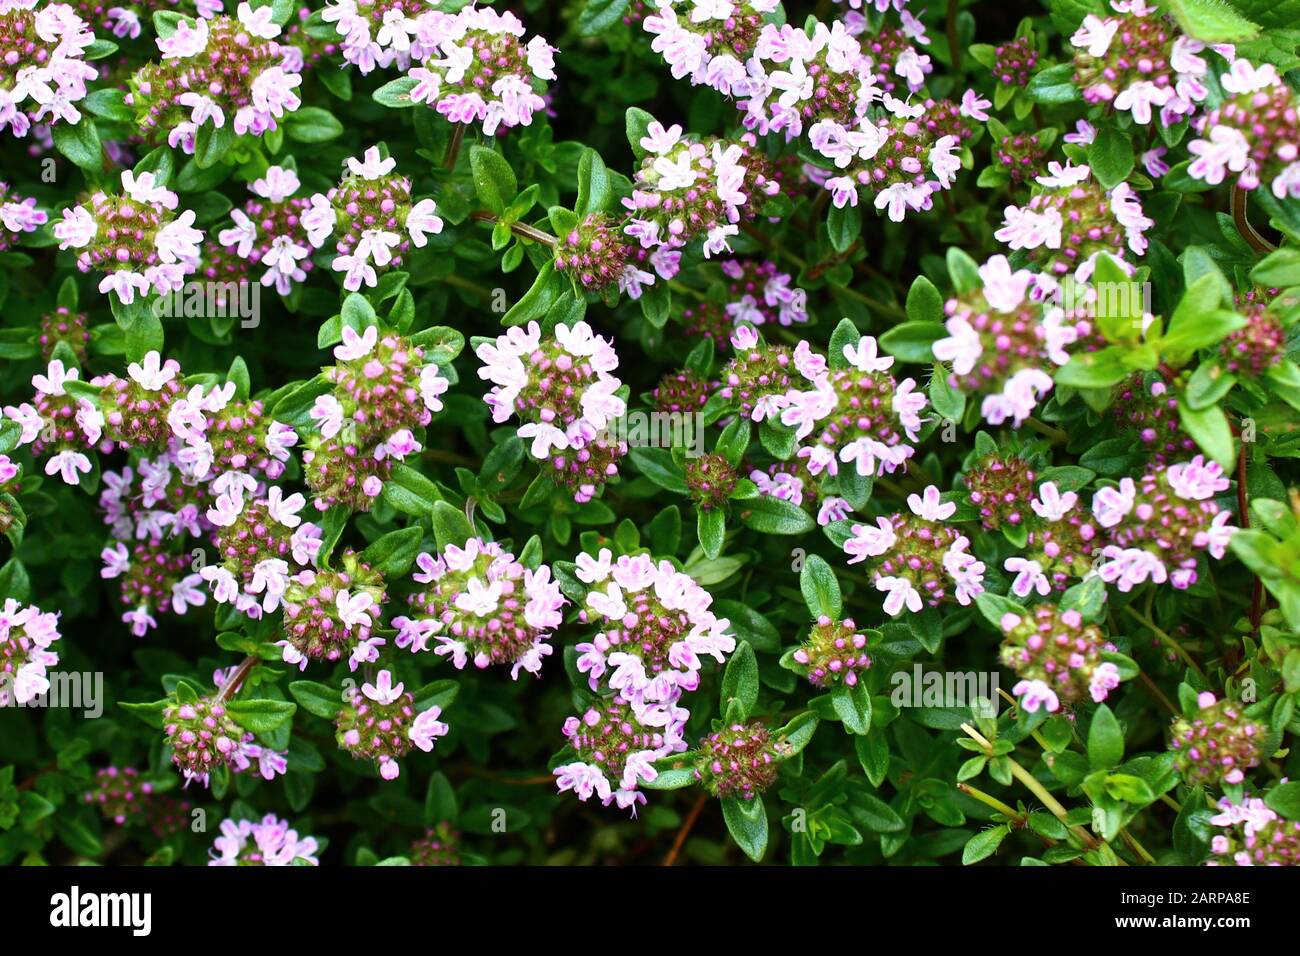 The Picture Shows Blossoming Thyme In The Garden Stock Photo